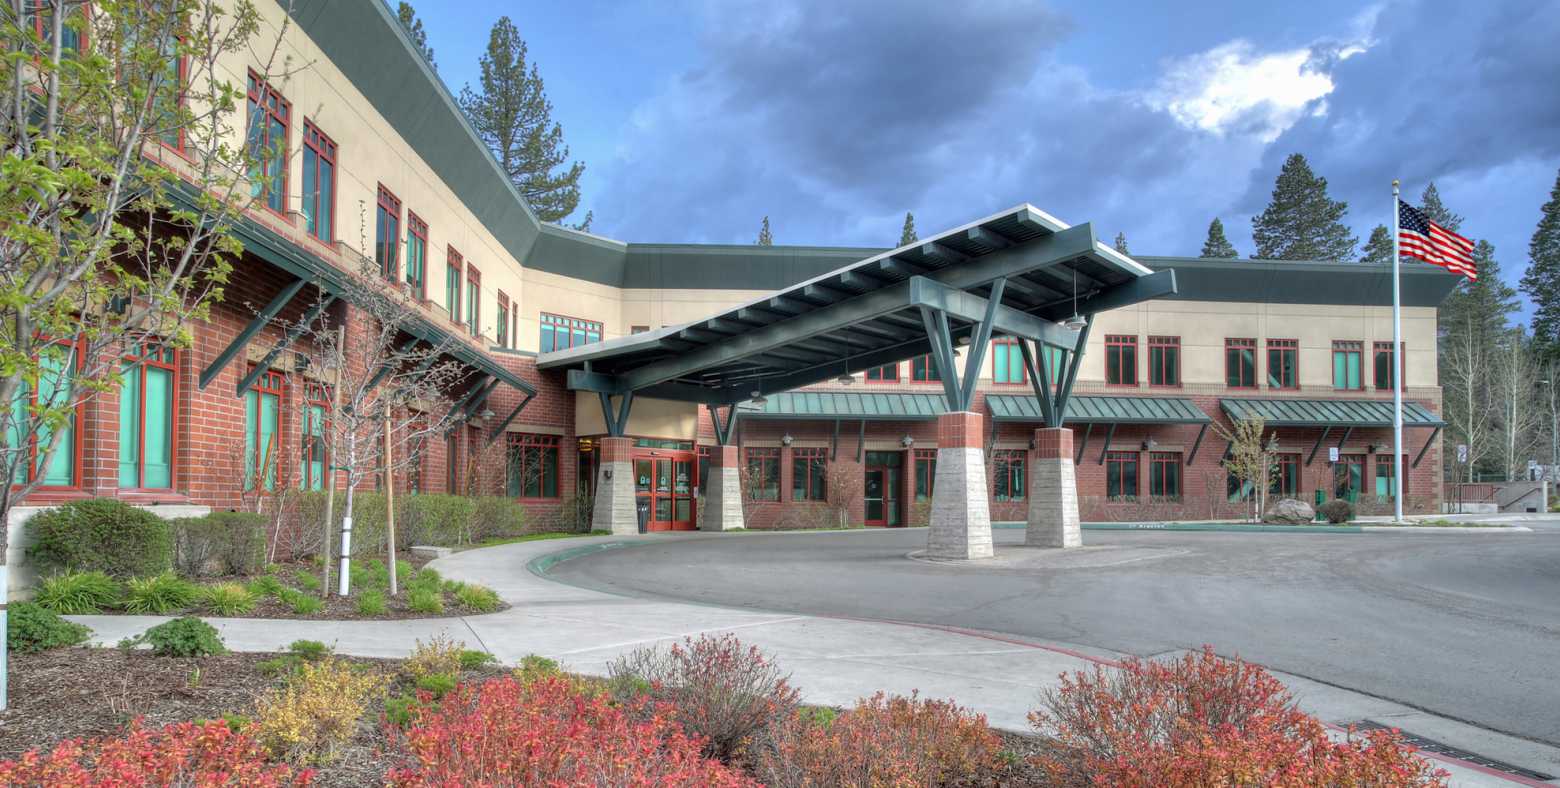 Tahoe Forest Hospital in Truckee, CA